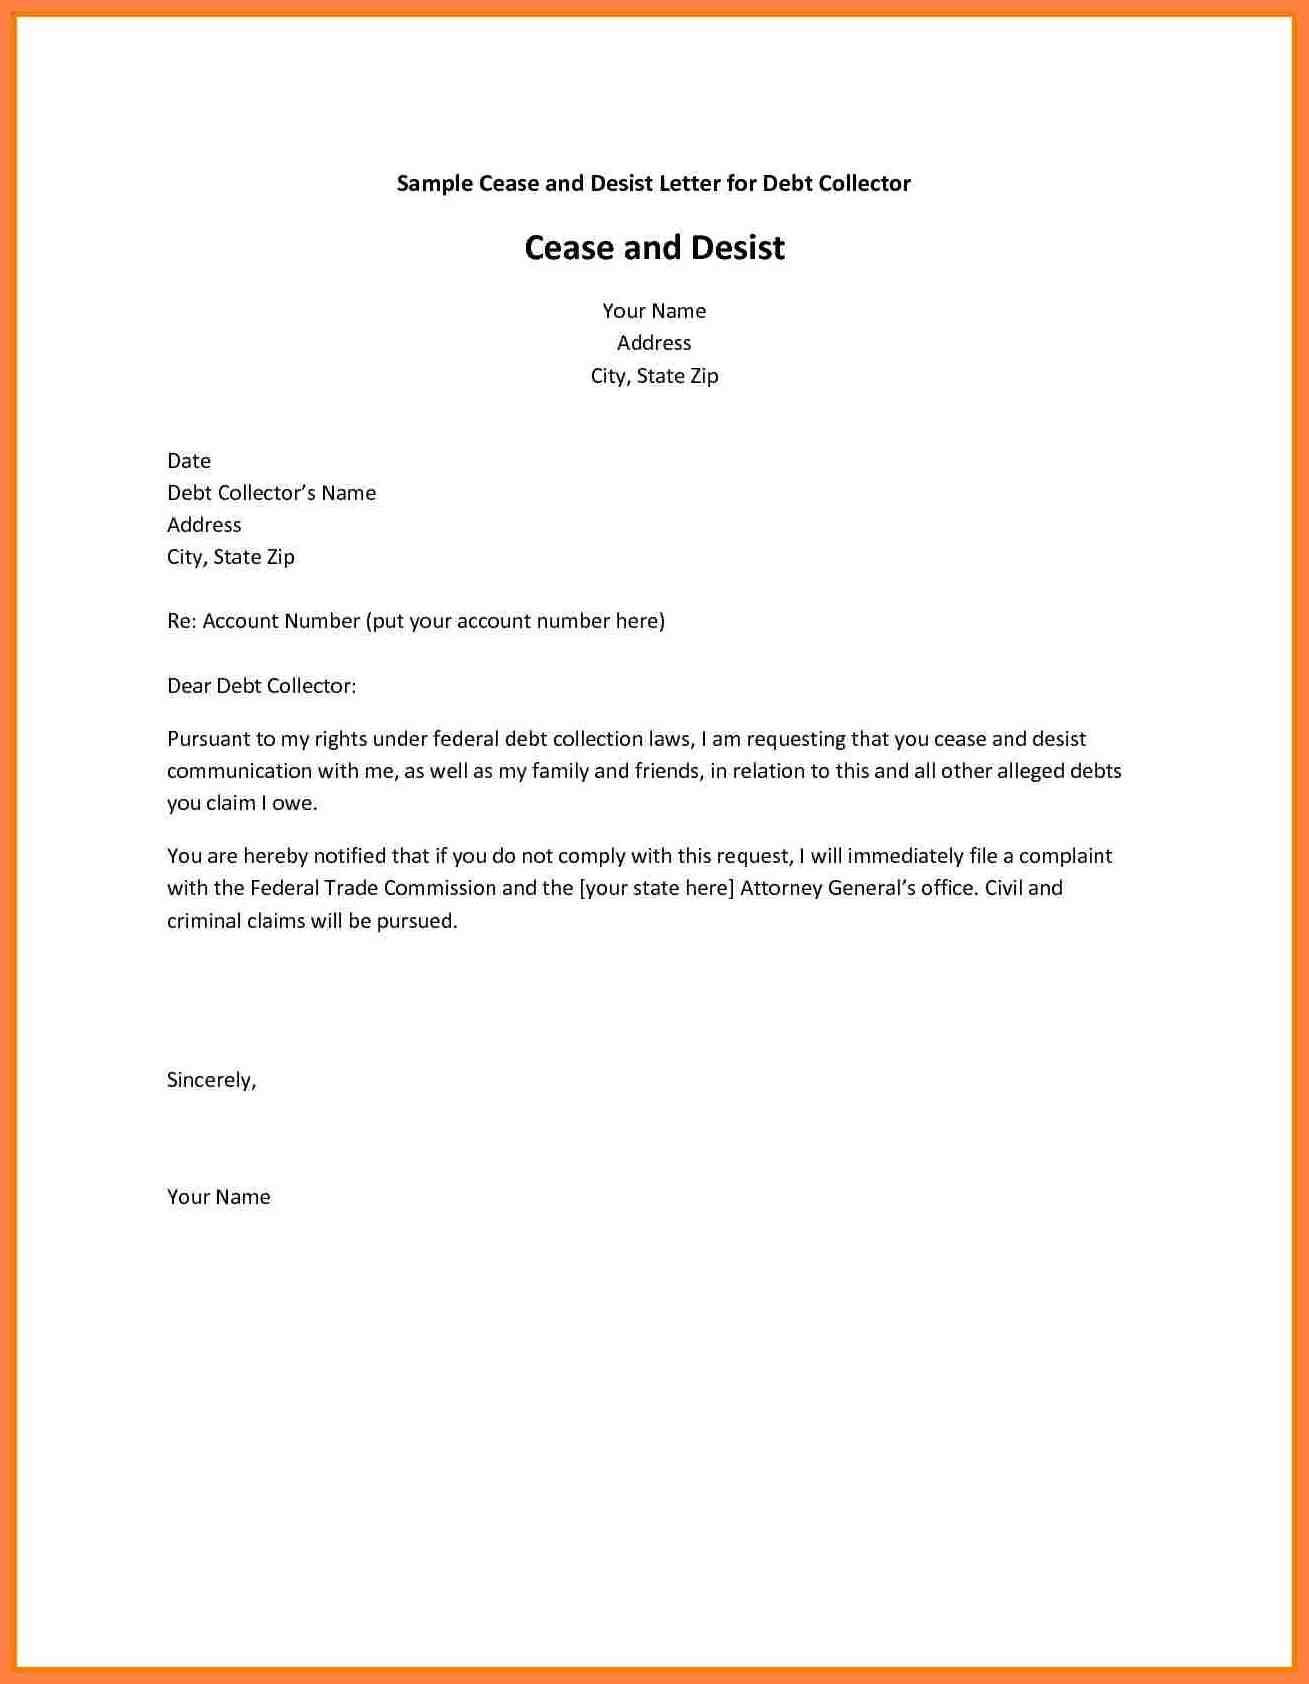 cease and desist contact letter template Collection-Cease and Desist Letter Sample Lovely Best Debt Collection Cease and Desist Letter Template 7-o